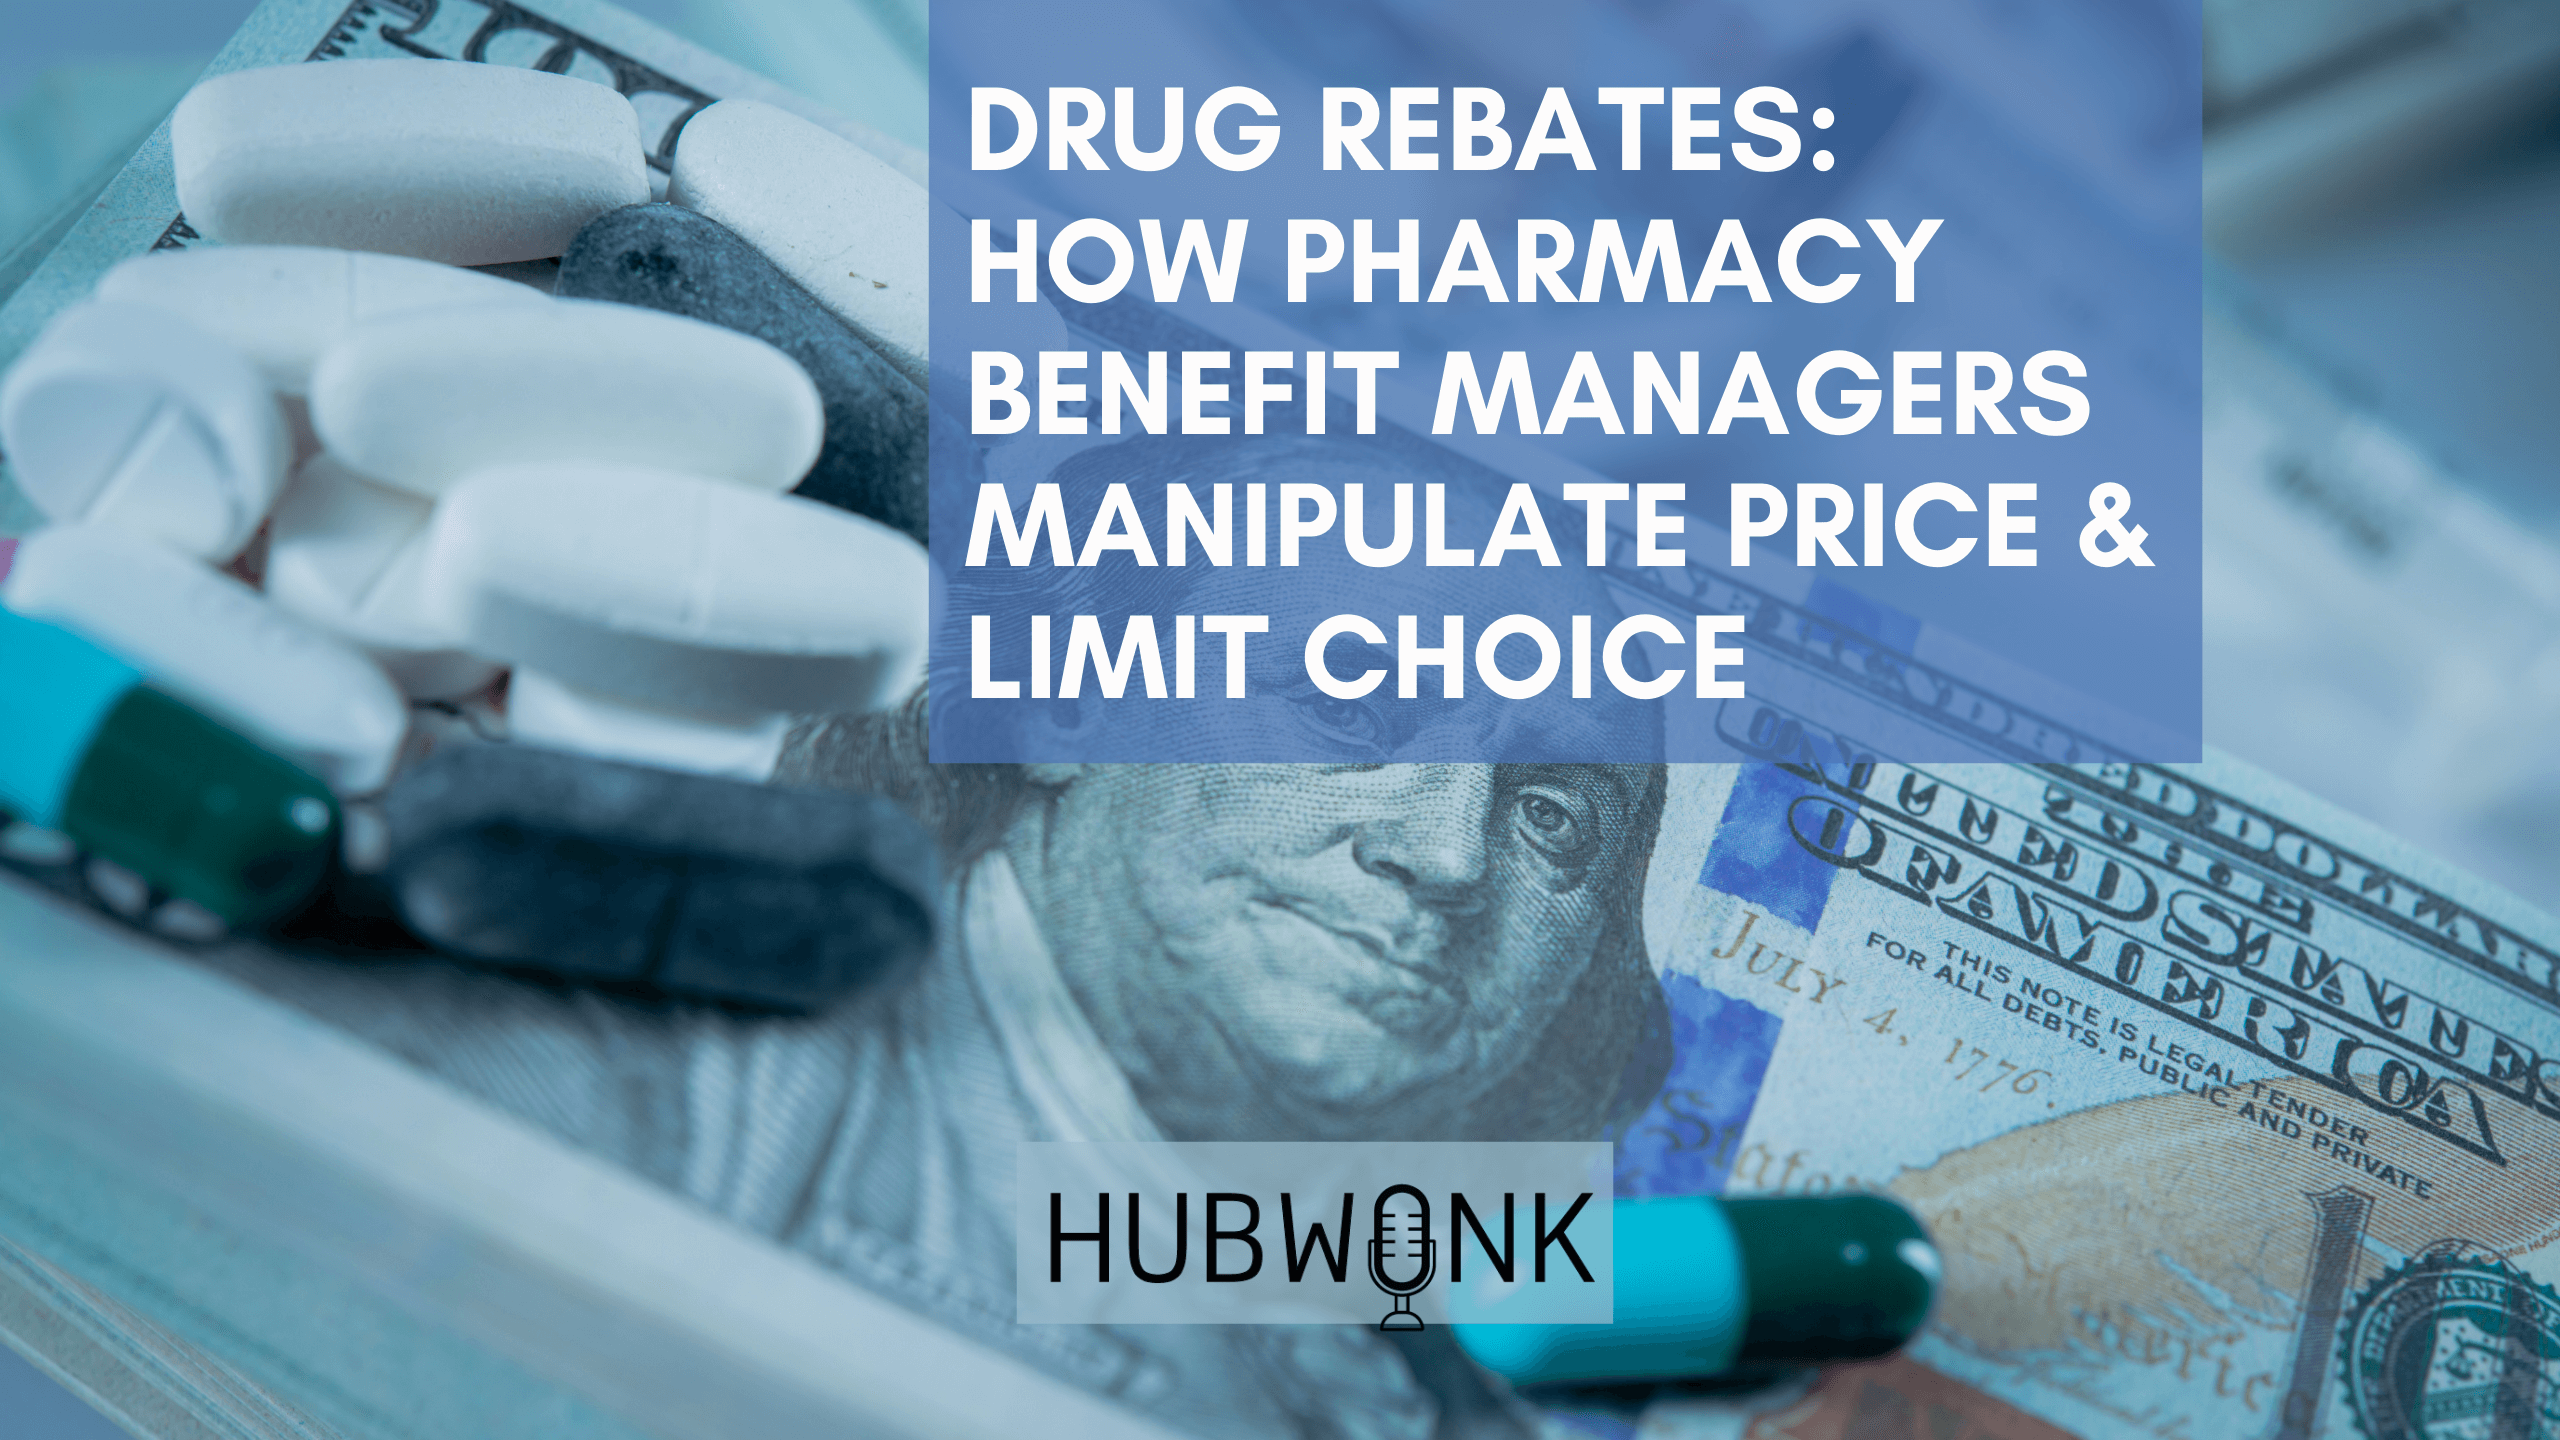 Drug Rebates: How Pharmacy Benefit Managers Manipulate Price & Limit Choice